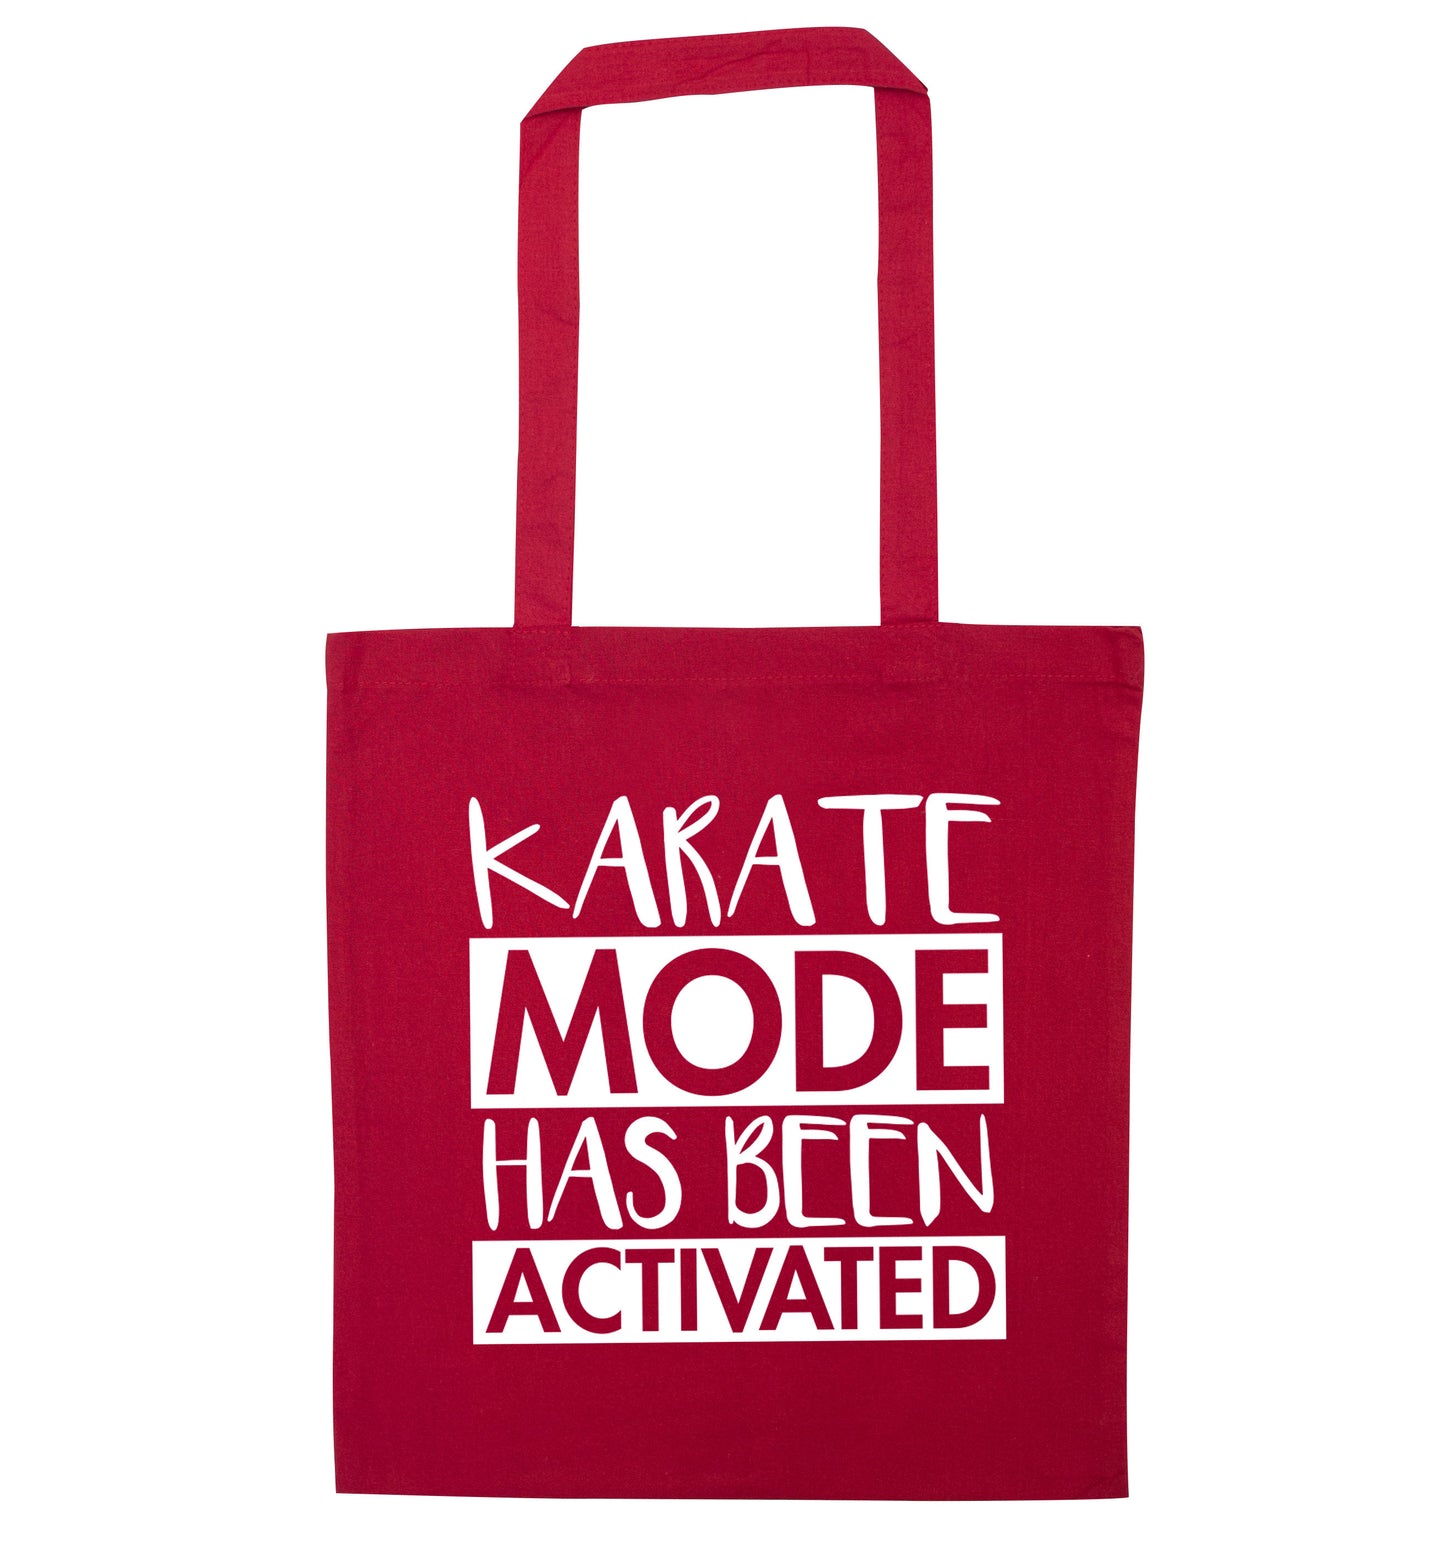 Karate mode activated red tote bag